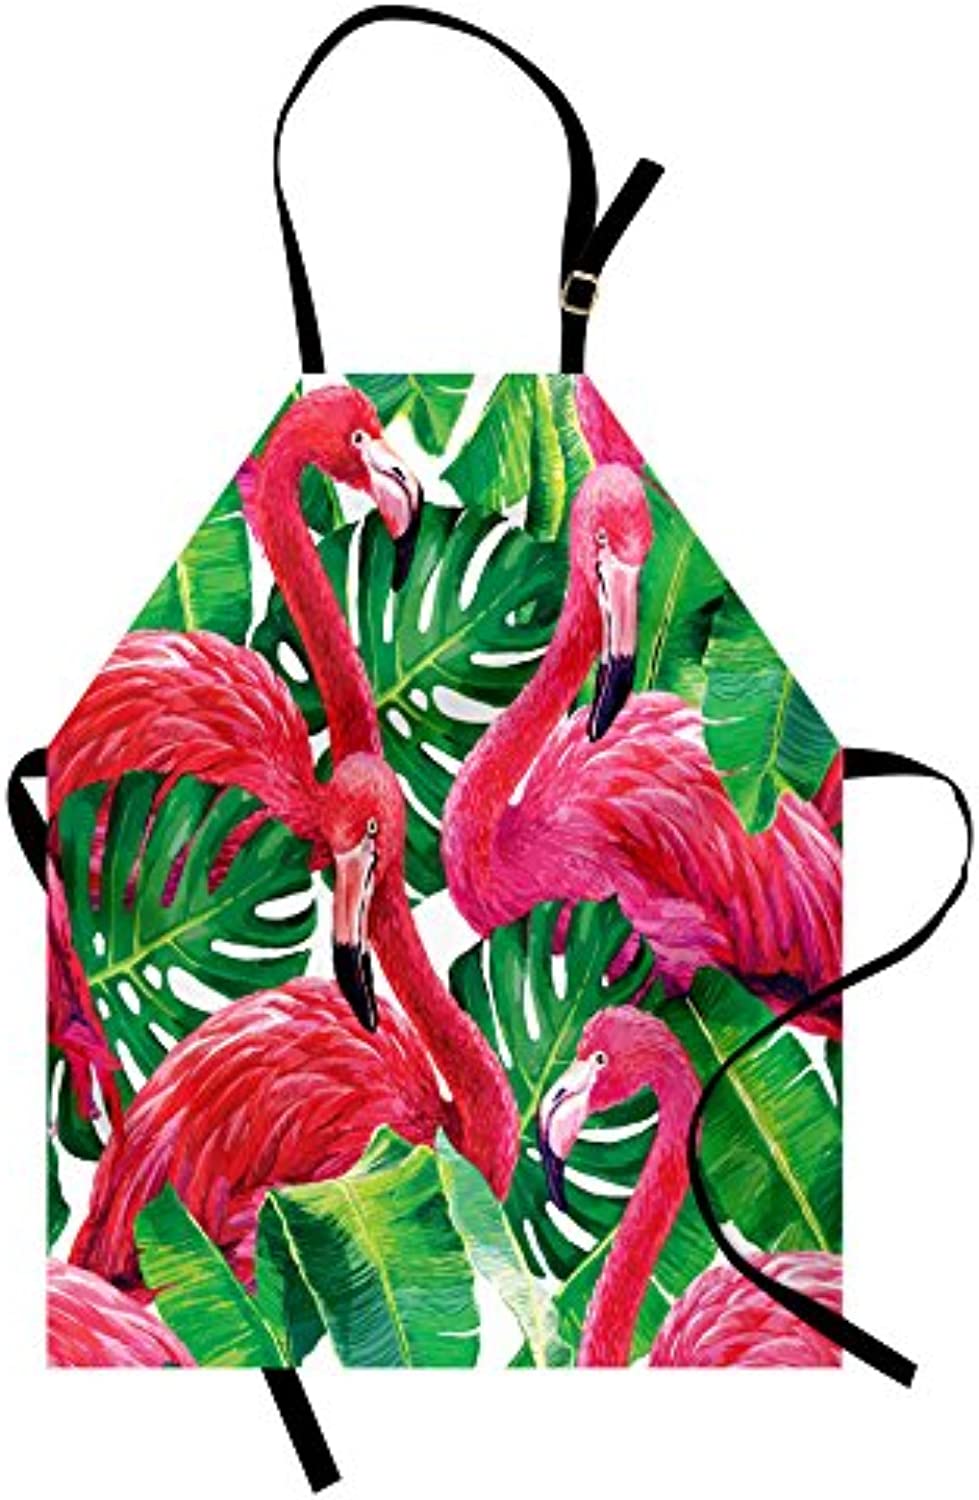 Granbey Flamingo Apron  Flamingos Sitting on Macro Tropic Exotic Leaves Graphic in Retro Style Art  Unisex Kitchen Bib with Adjustable Neck for Cooking Gardening  Adult Size  Pink Green